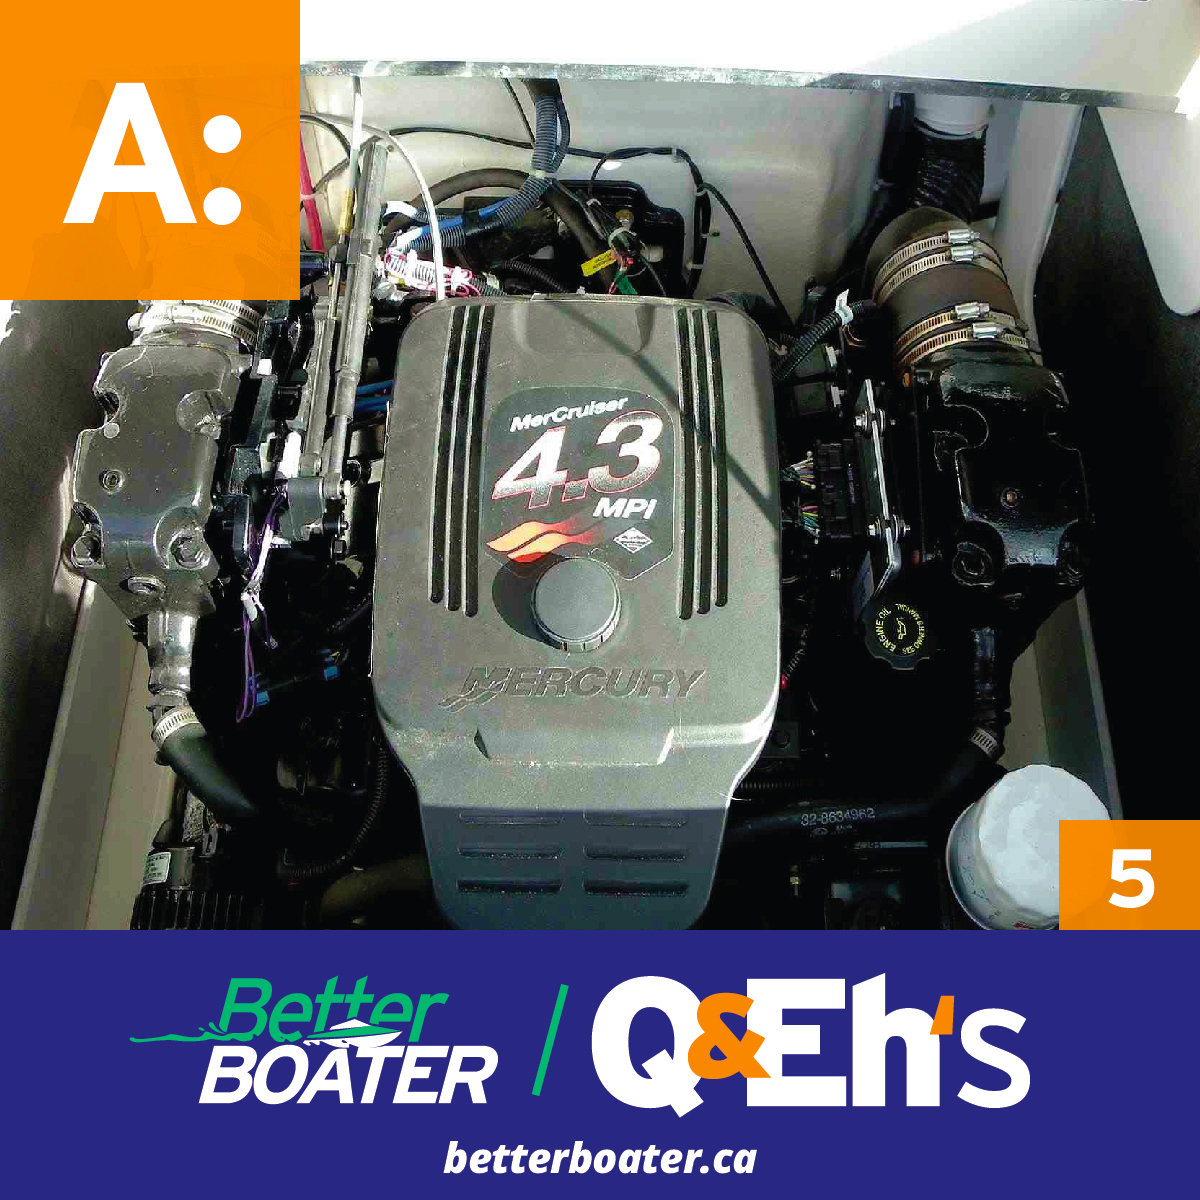 https://betterboater.ca/Blower%20Time